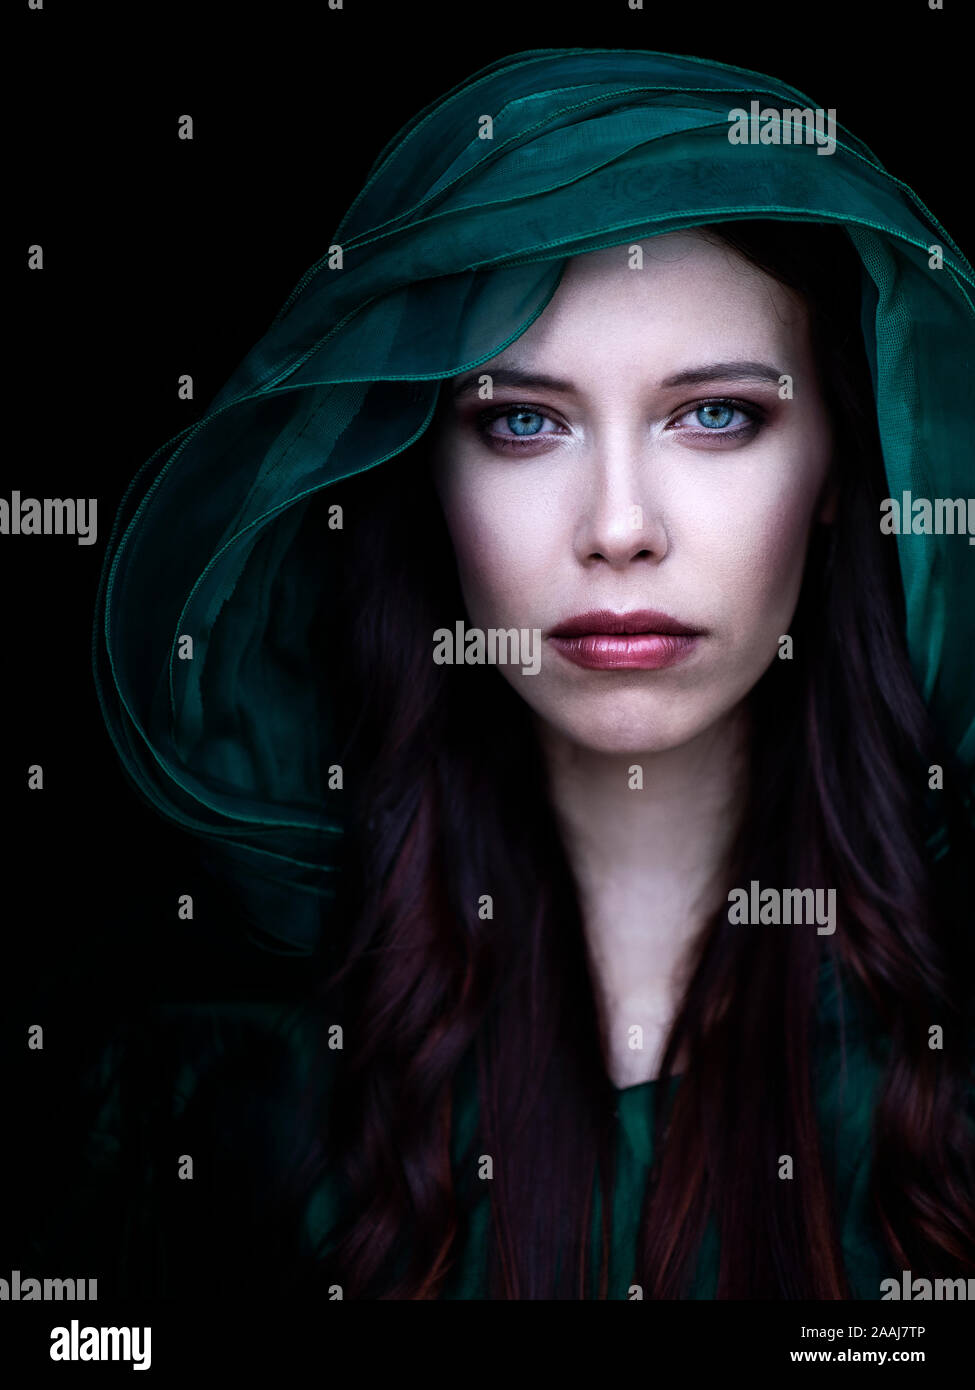 Stunningly beautiful young woman with blue eyes and long red hair looking at camera, wearing red hood Stock Photo